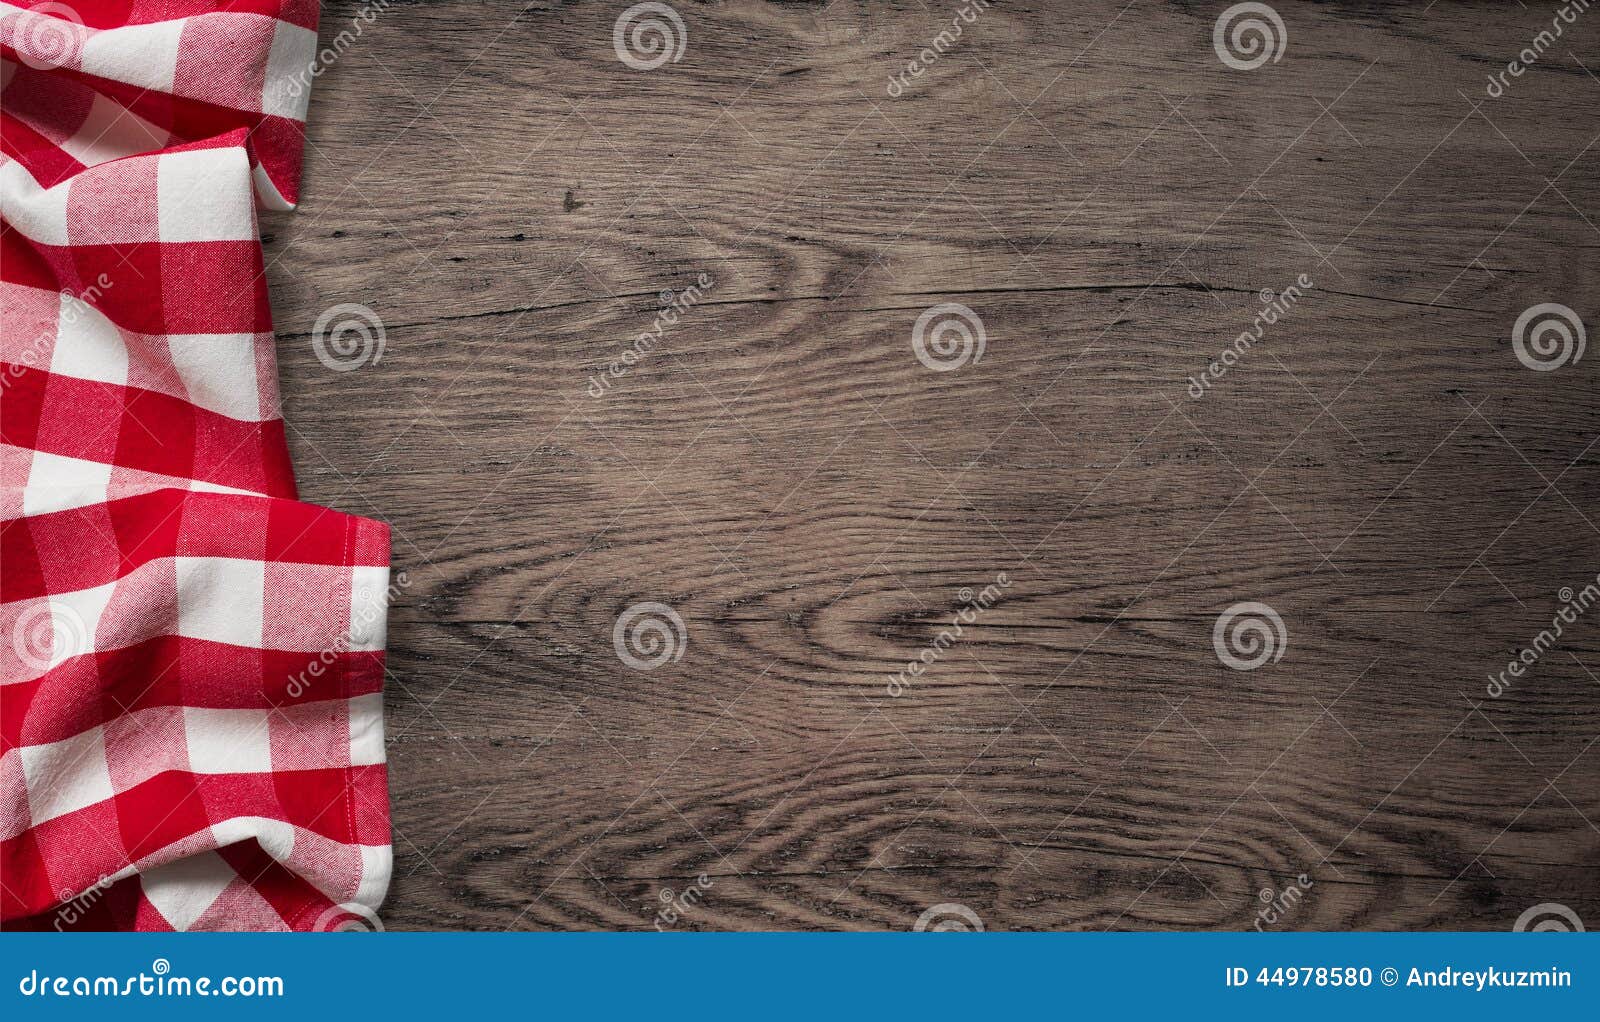 Picnic Tablecloth On Old Wooden Table Top View Stock Photo 